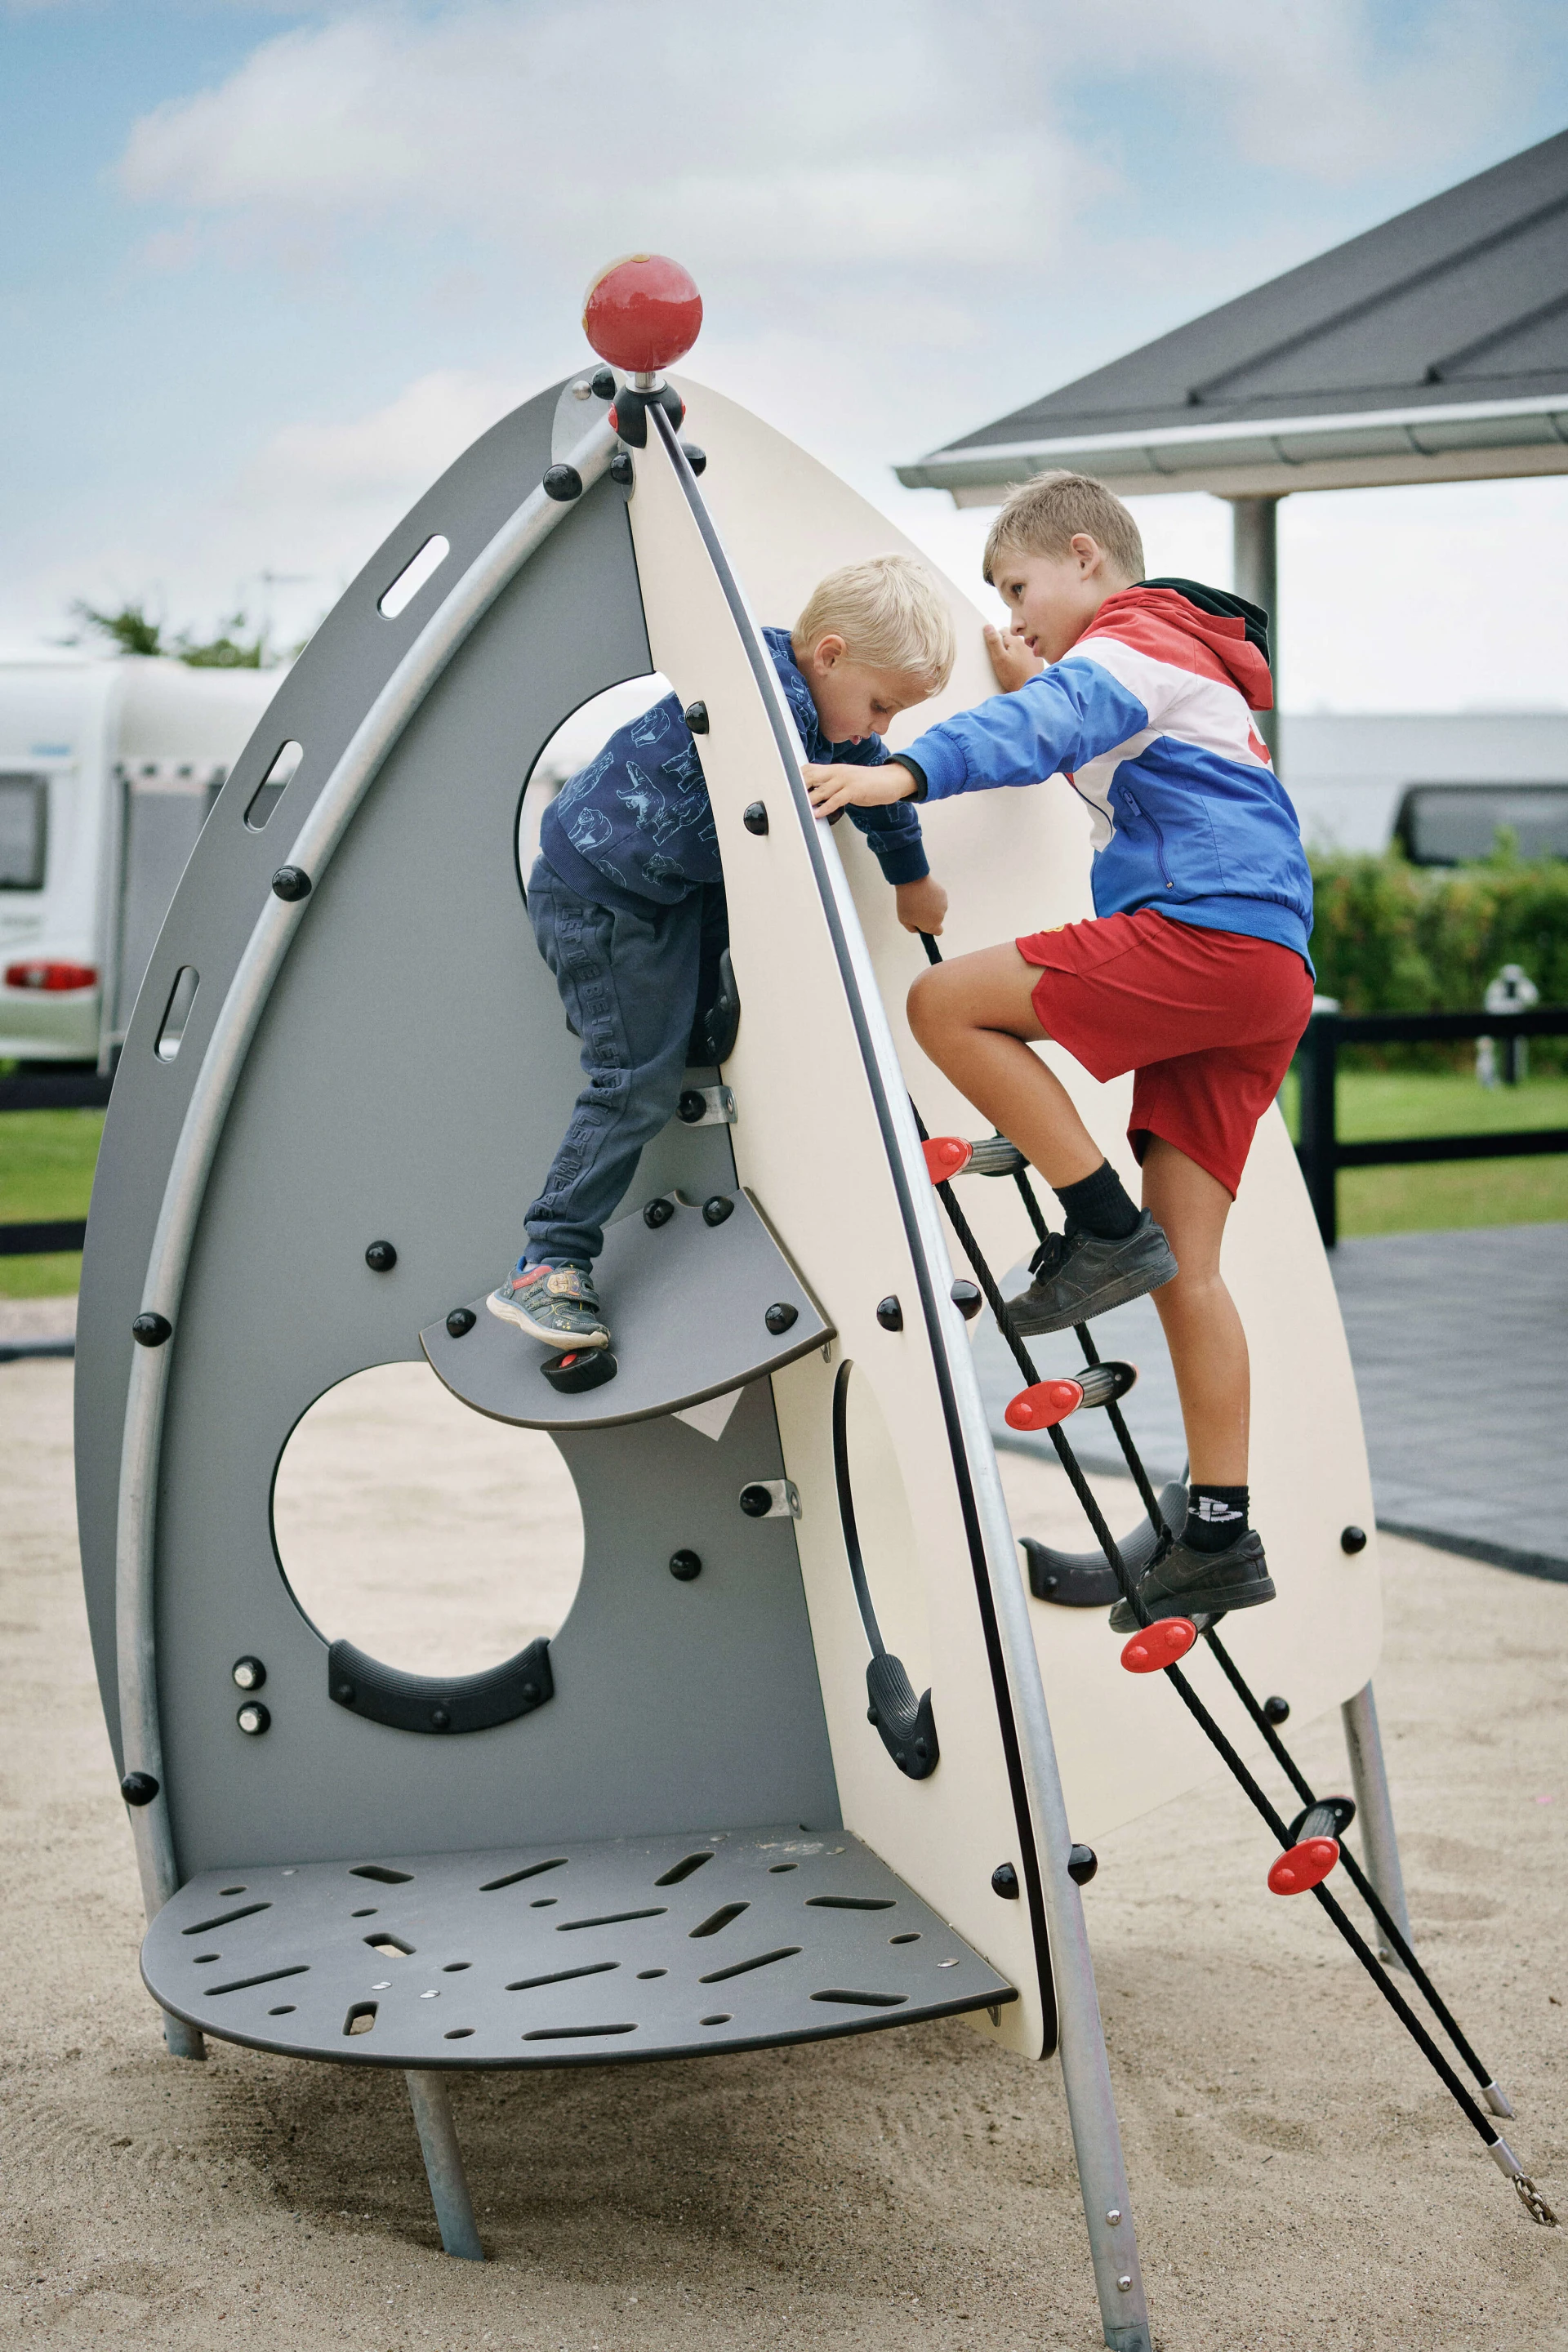 Two young boys playing on space themed playground equipment. Themes and design styles are important considerations for any playground plan. 